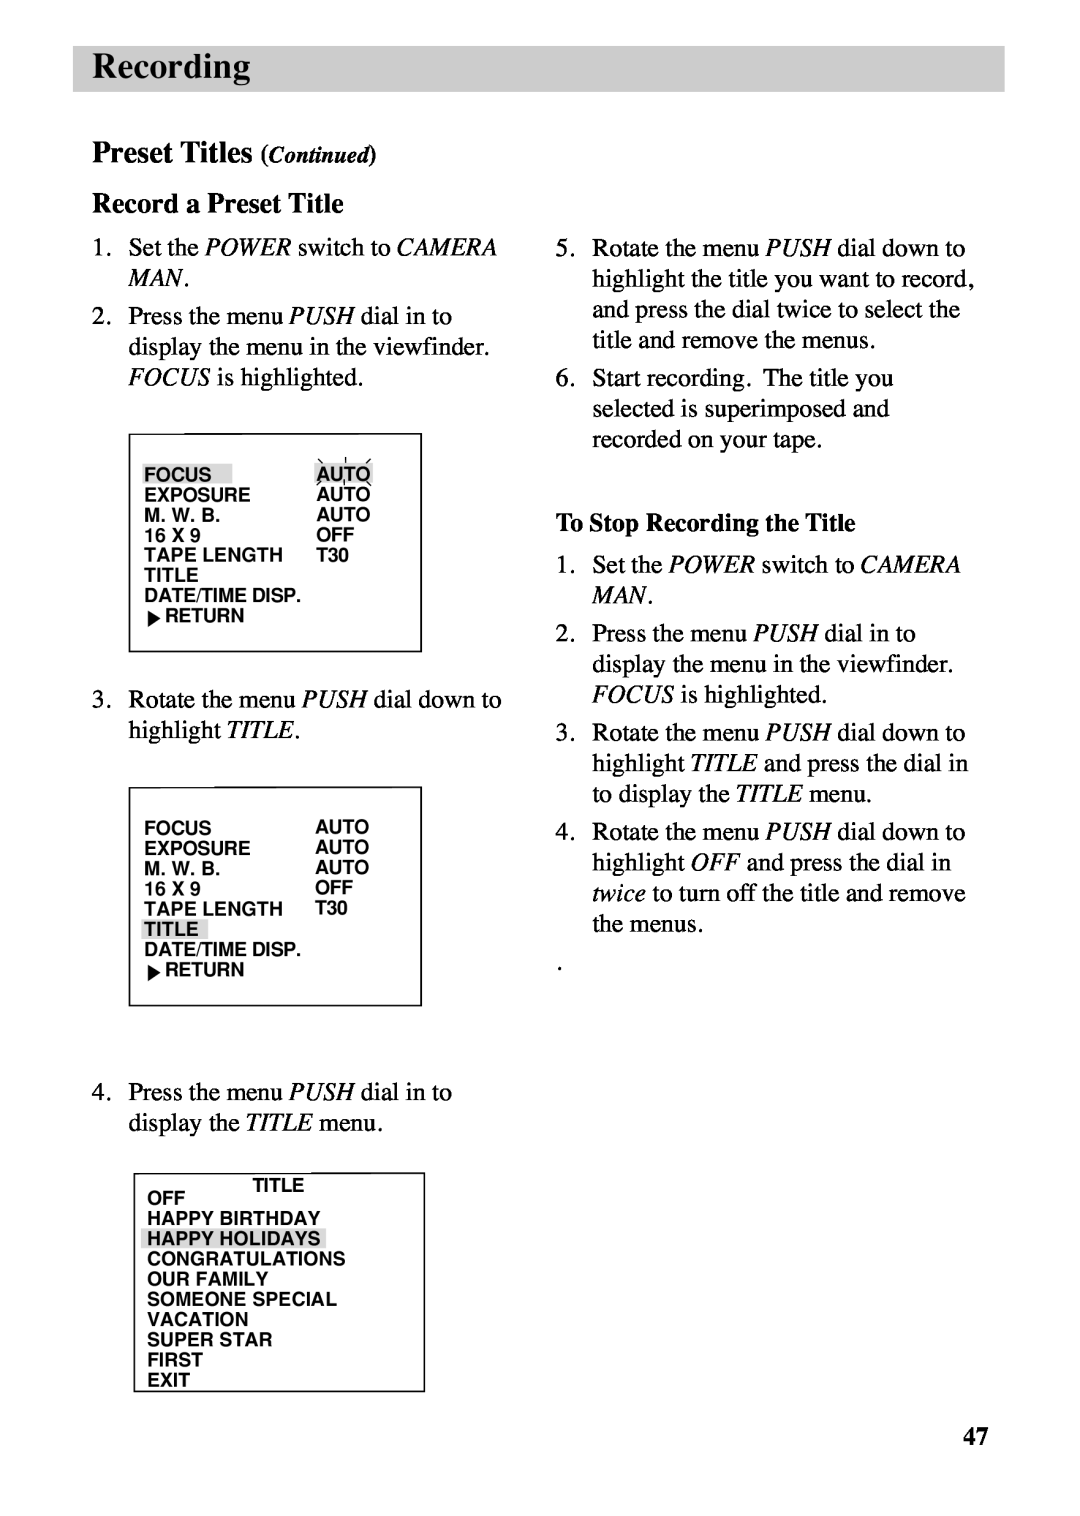 RCA CC6263 manual Preset Titles Continued, Record a Preset Title, To Stop Recording the Title 